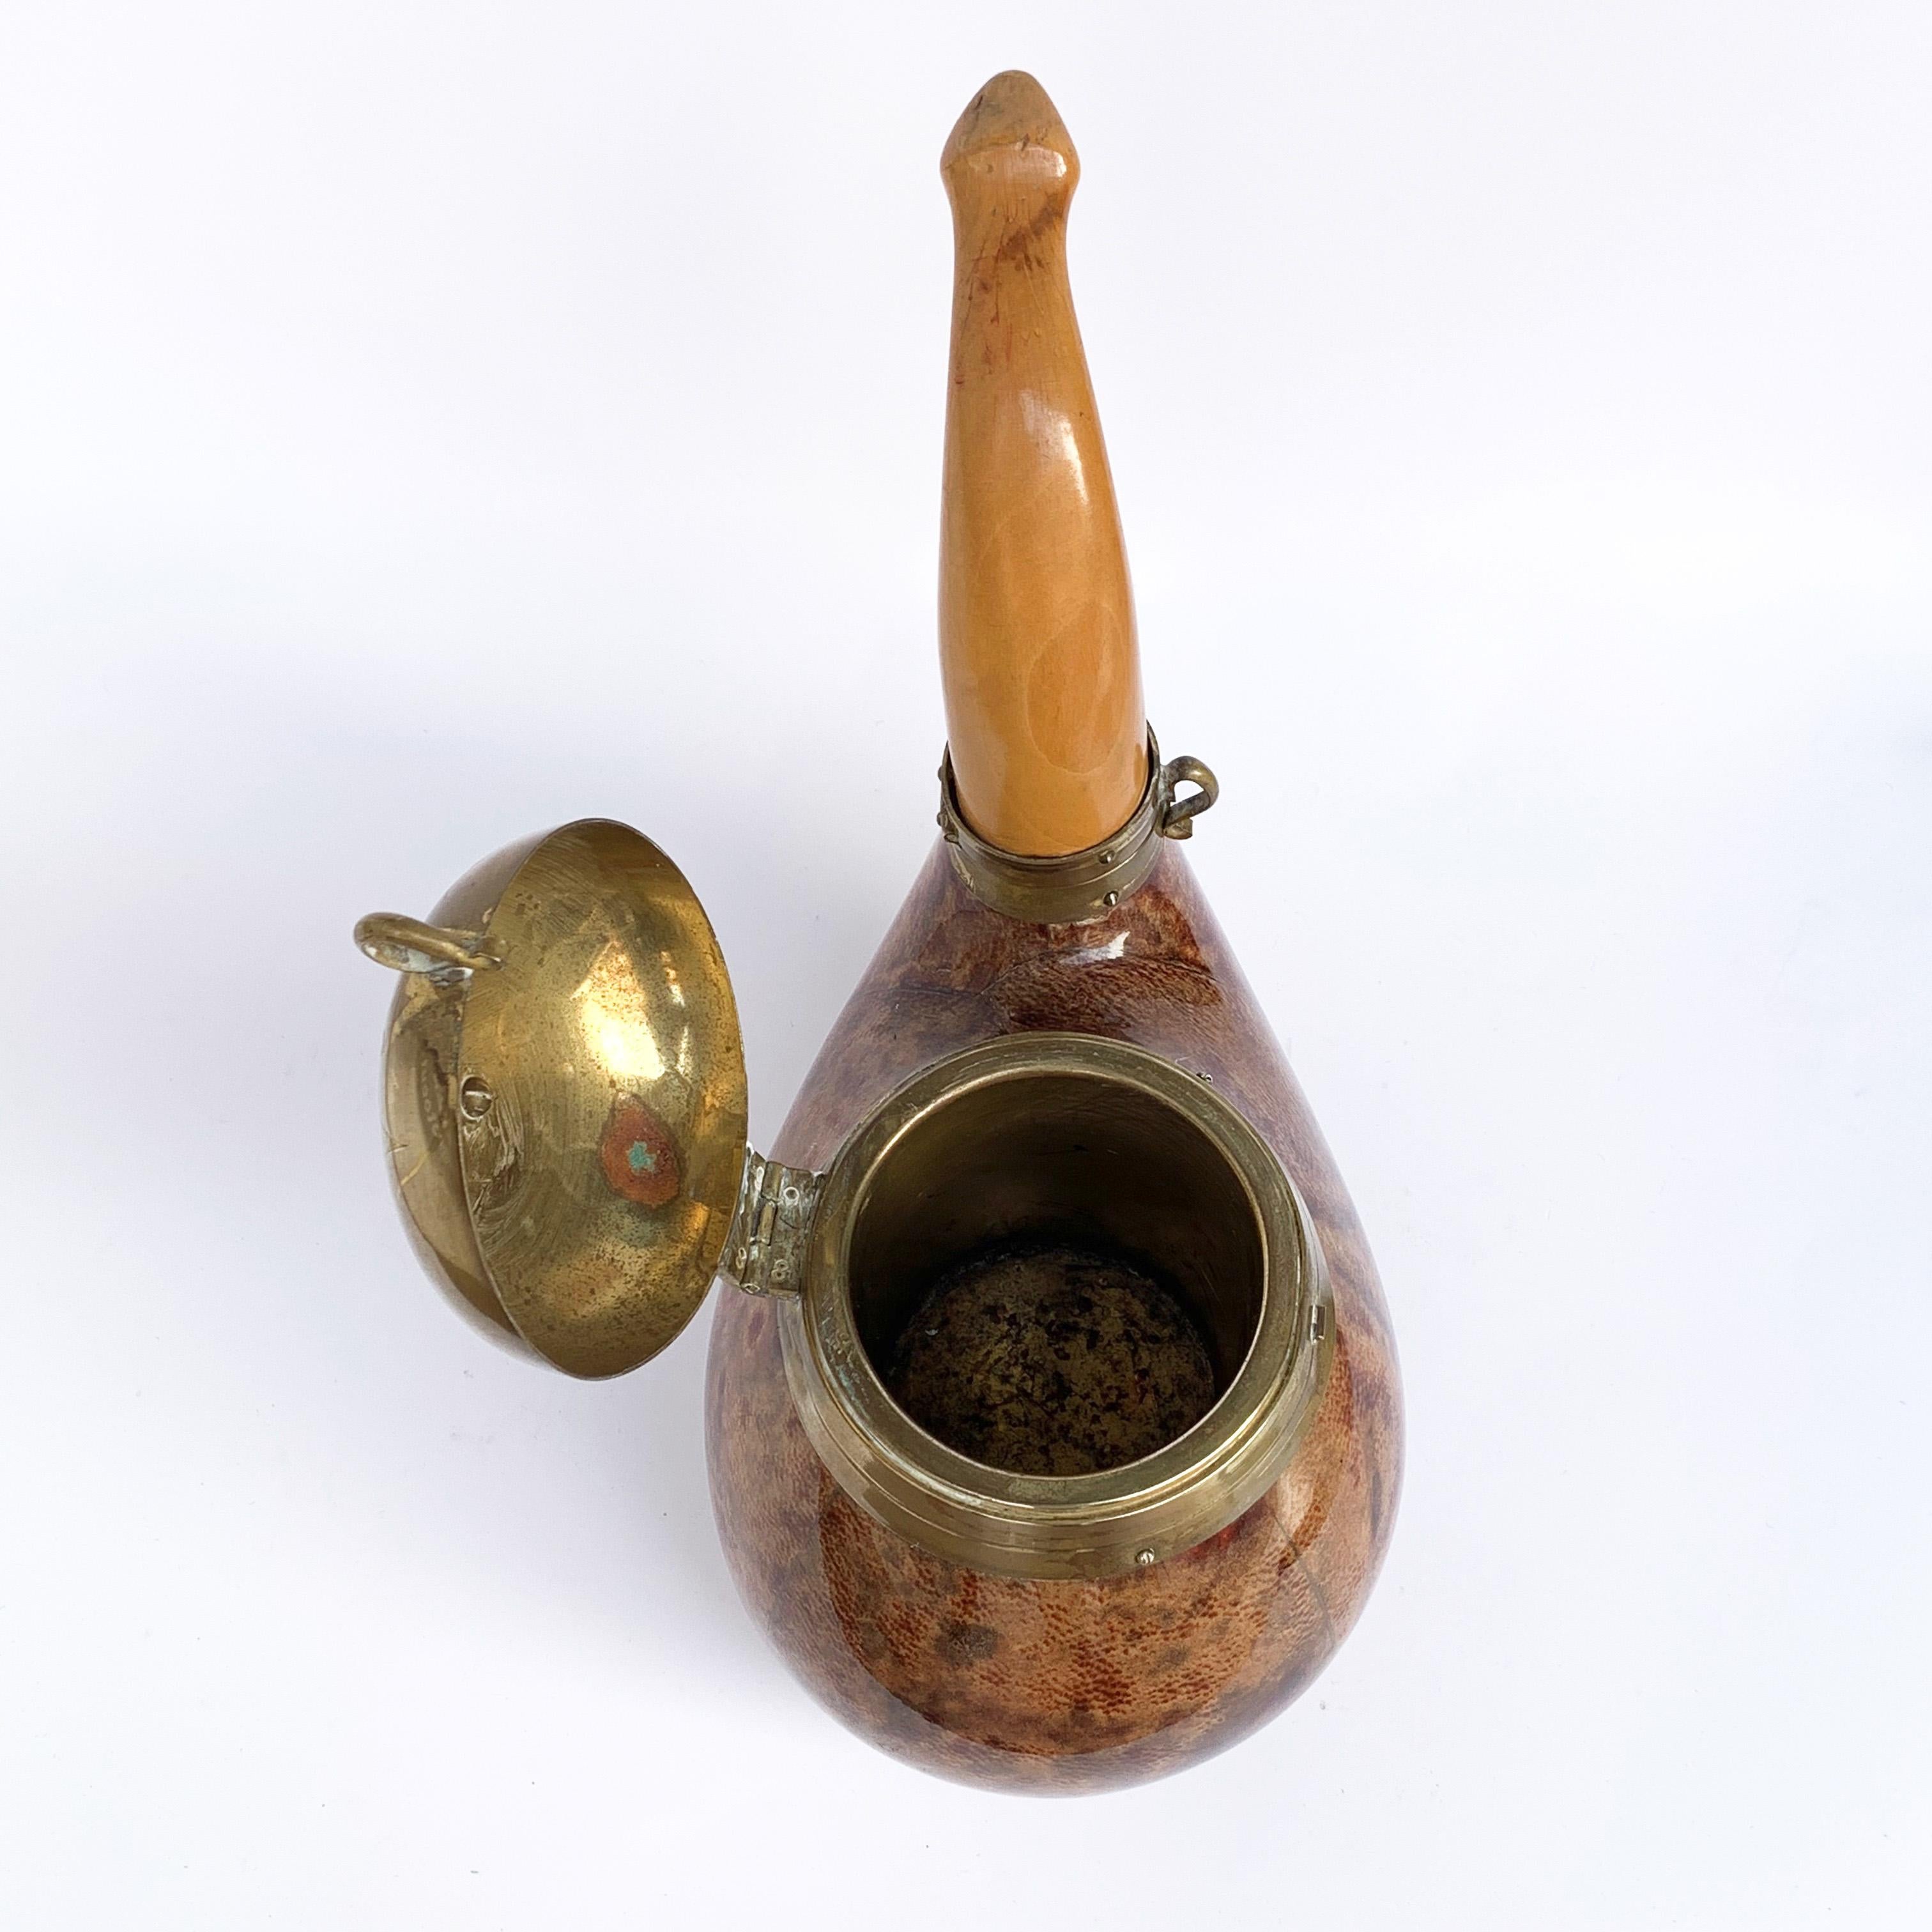 Italy 1940s Aldo Tura Goat Skin, Brass and Wood Tobacco Container, Pipe Shape For Sale 1